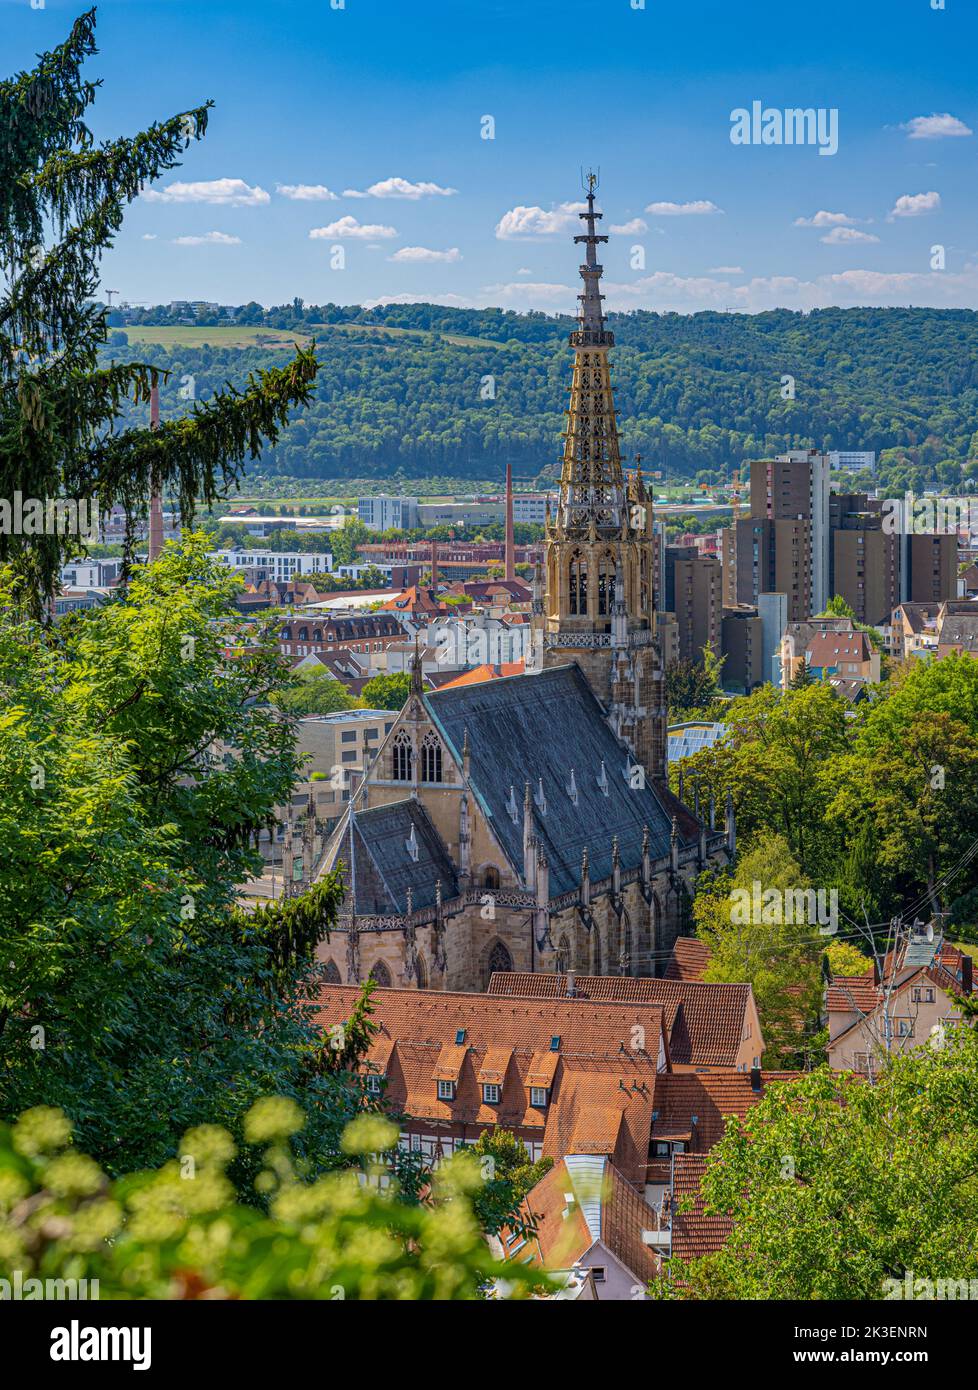 Neckarhaldenweg with a view to Church of Our Lady, Esslingen, Baden-Württemberg, Germany Stock Photo